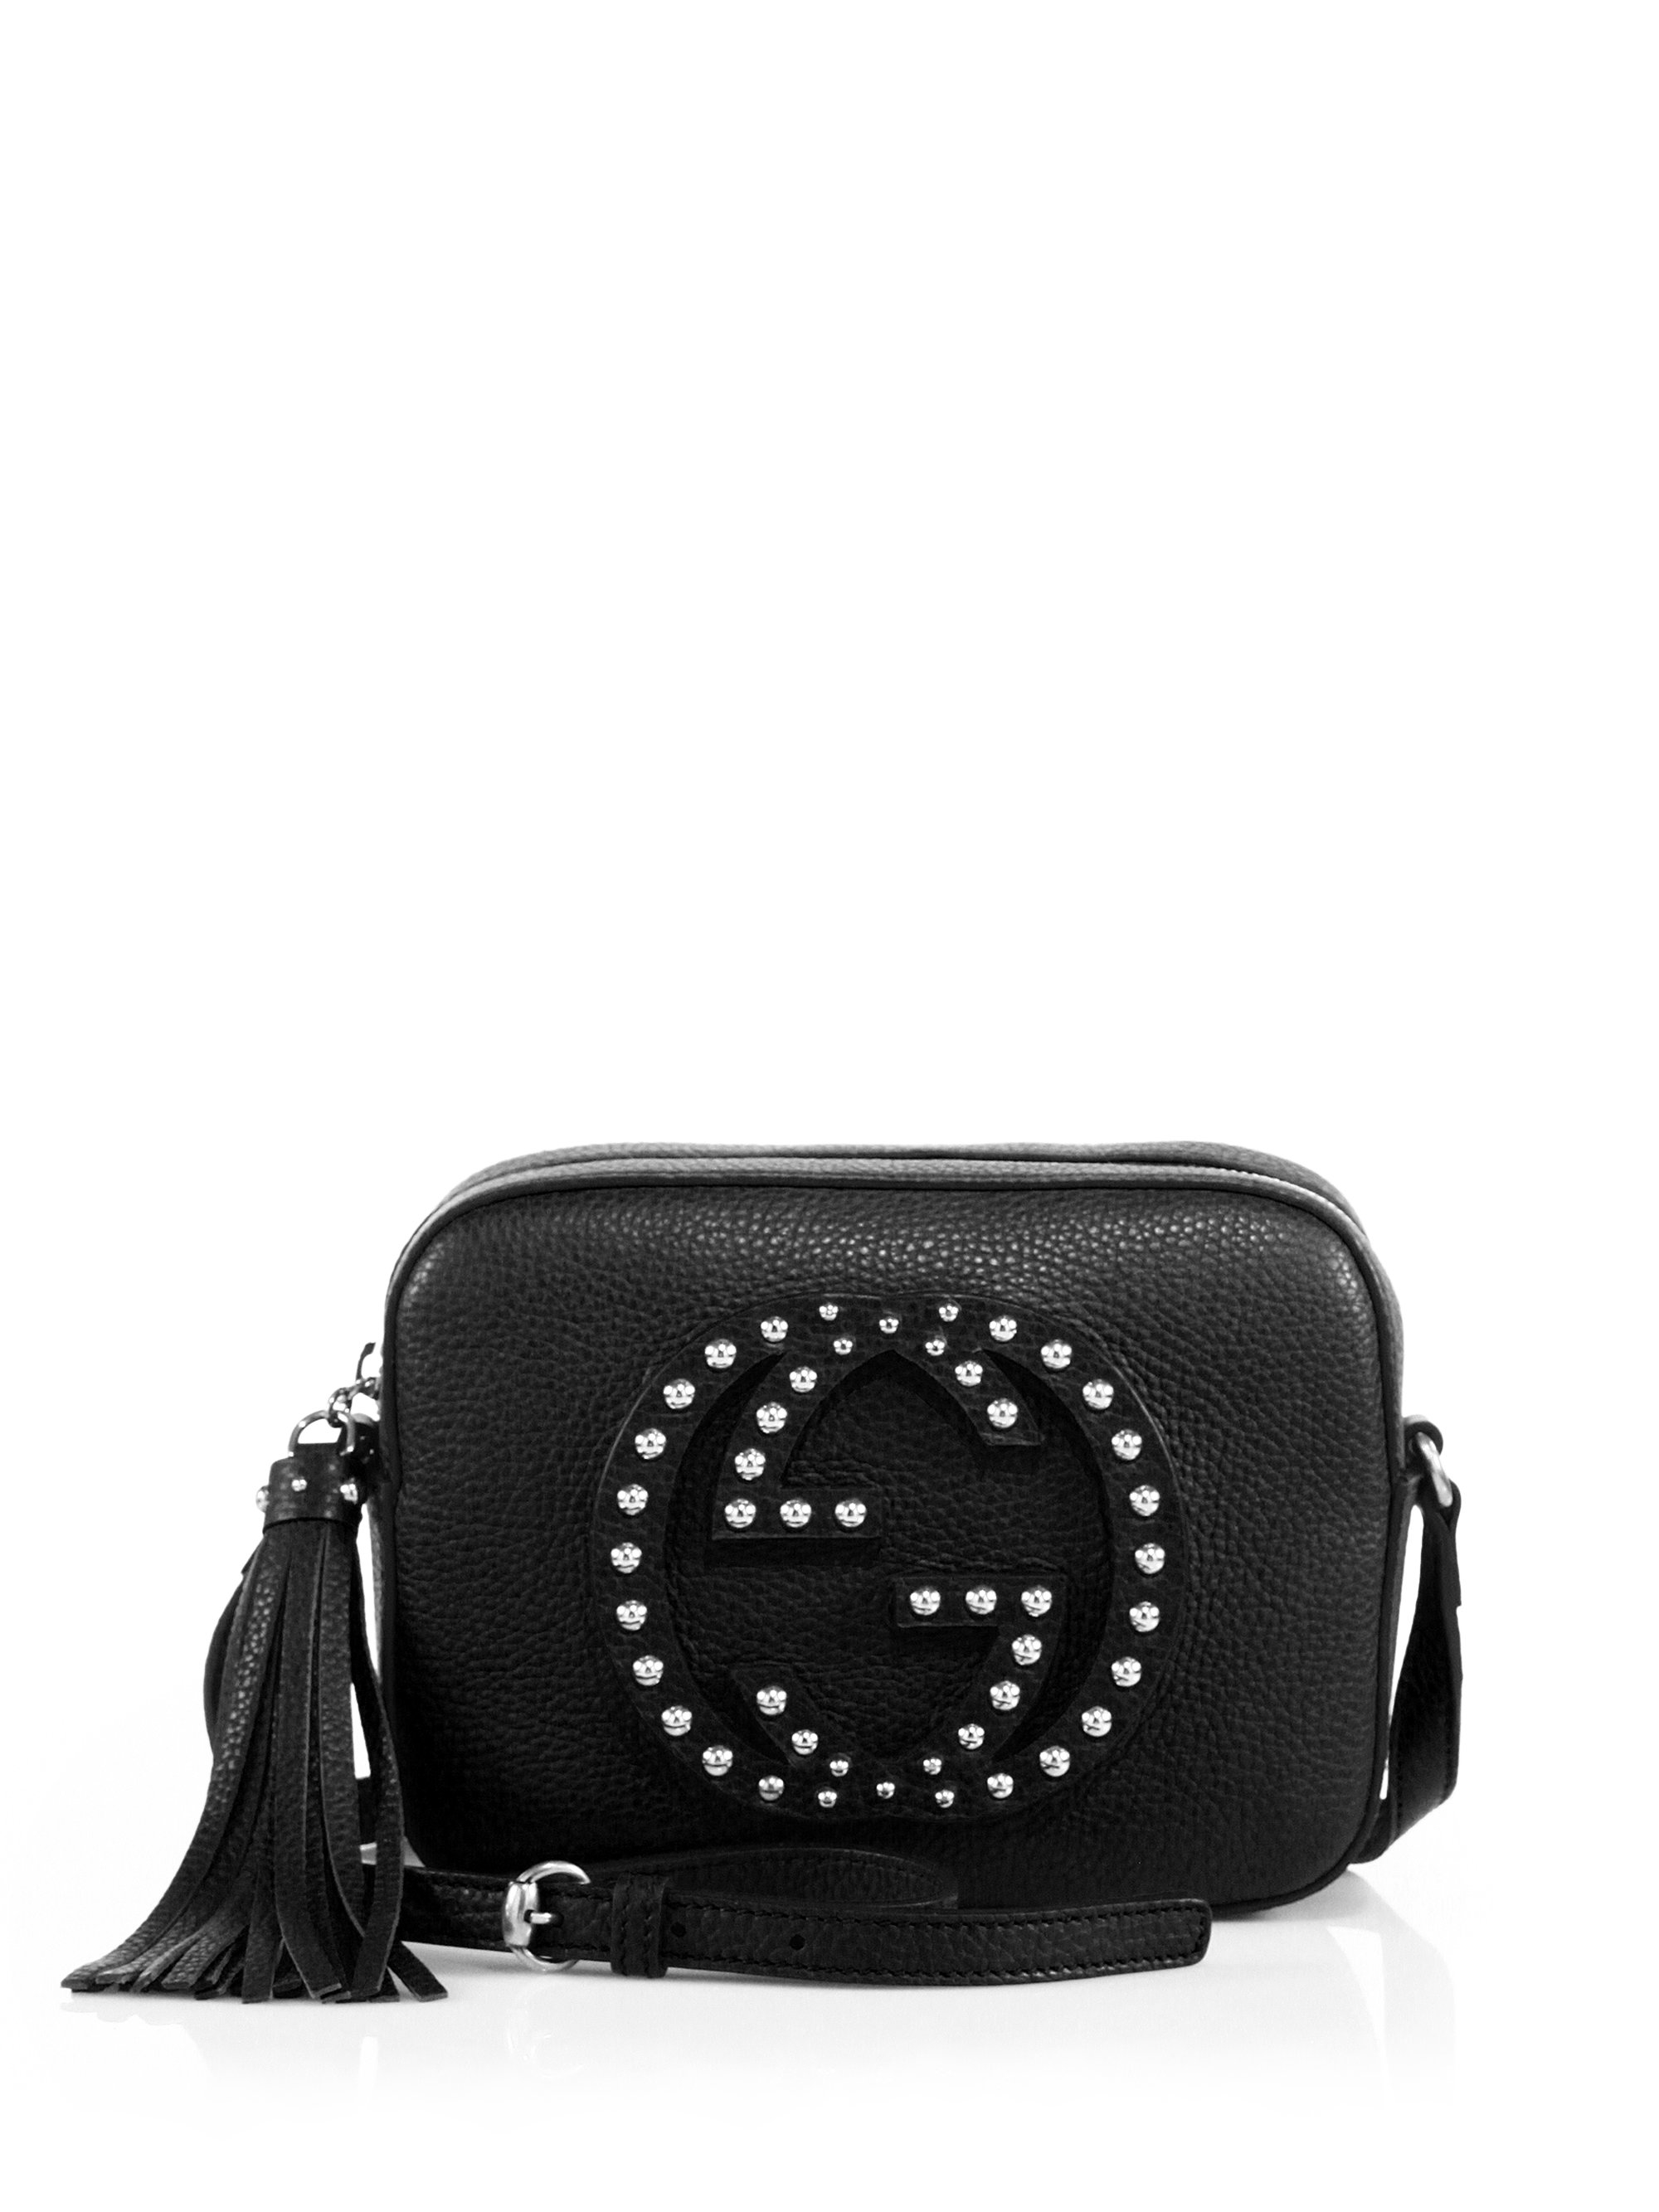 Lyst - Gucci Soho Small Studded Leather Disco Bag in Black